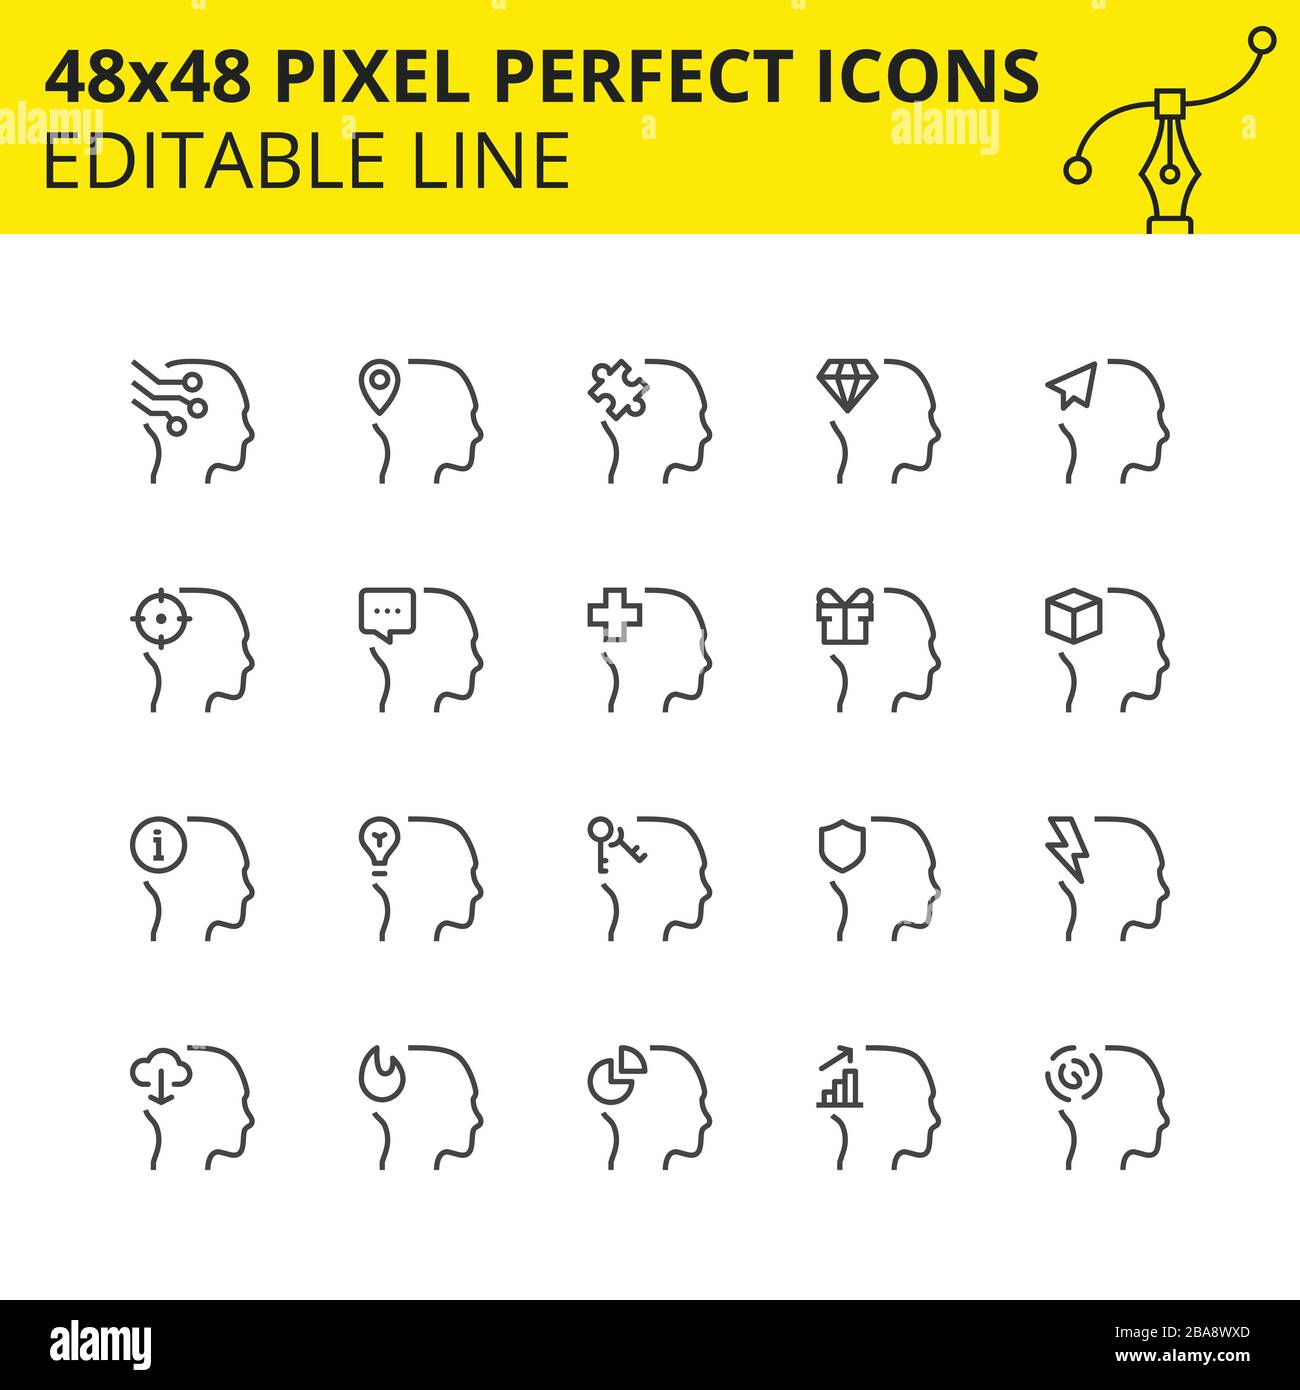 Simple Set Icons of Human Head and Avatars. Person Symbols for info graphics, websites and mobile applications which includes Chip, Message, Idea Stock Vector